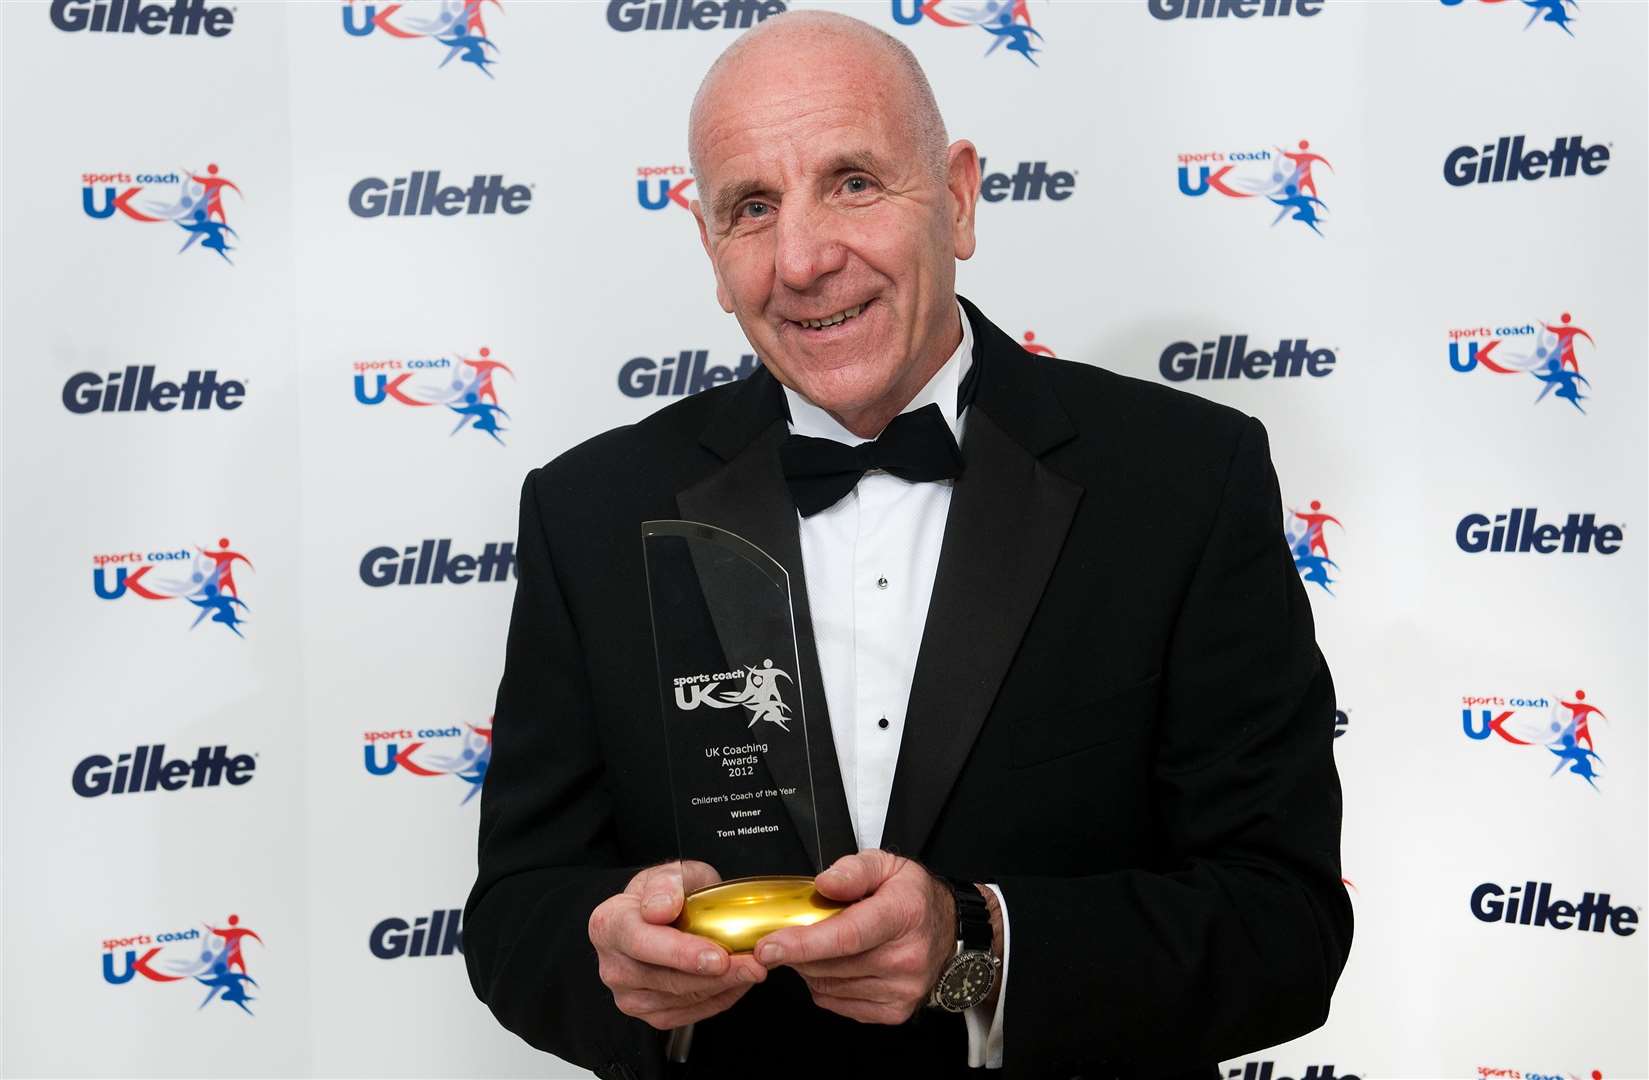 Tom Middleton - pictured after being named Children's Coach of the Year award at the 2012 UK Coaching Awards. Picture: Phil Mingo/Pinnacle/Gillette